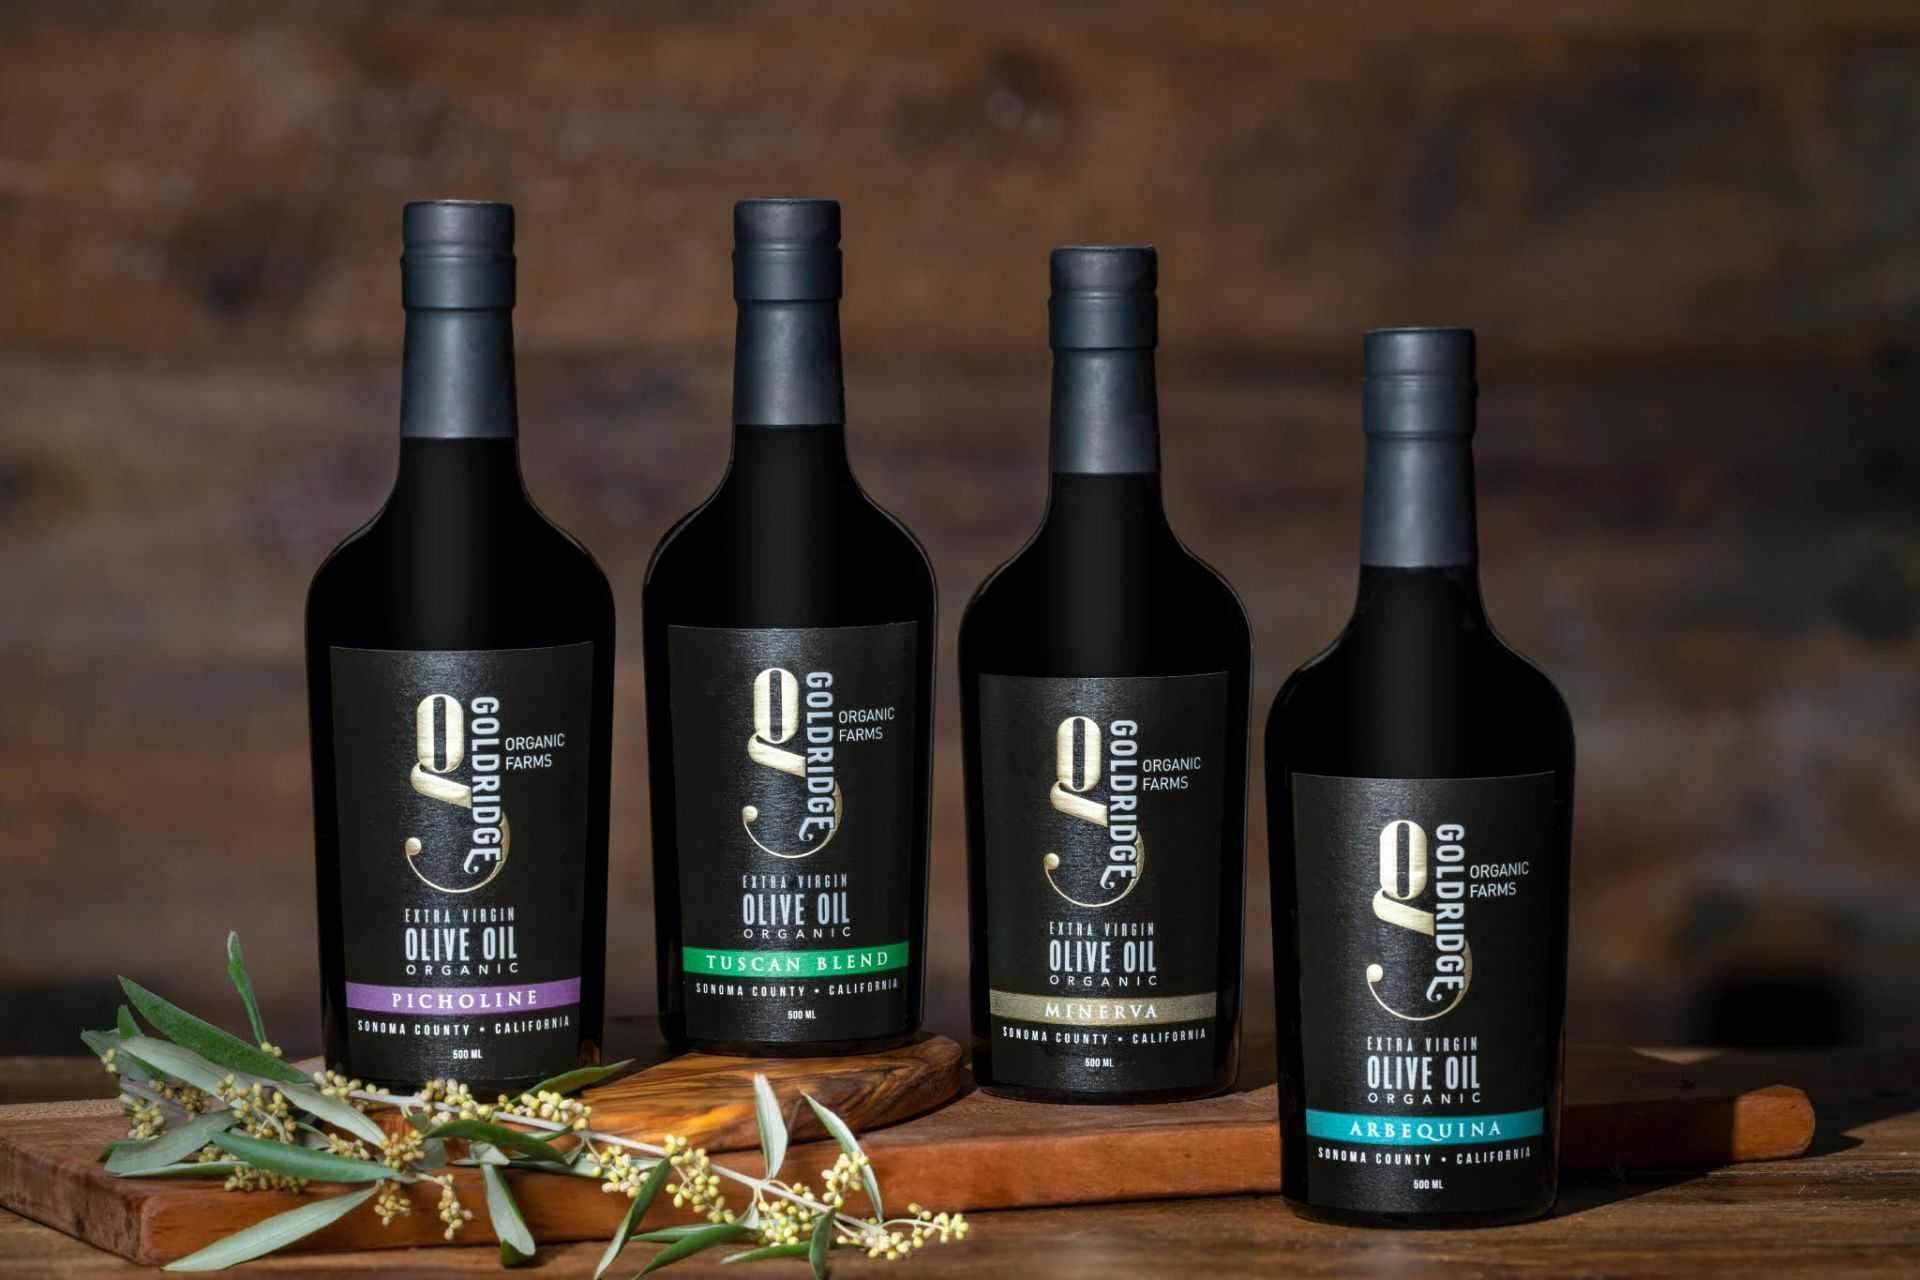 world-profiles-the-best-olive-oils-production-north-america-sustainable-organic-production-helps-one-california-producer-standout-olive-oil-times